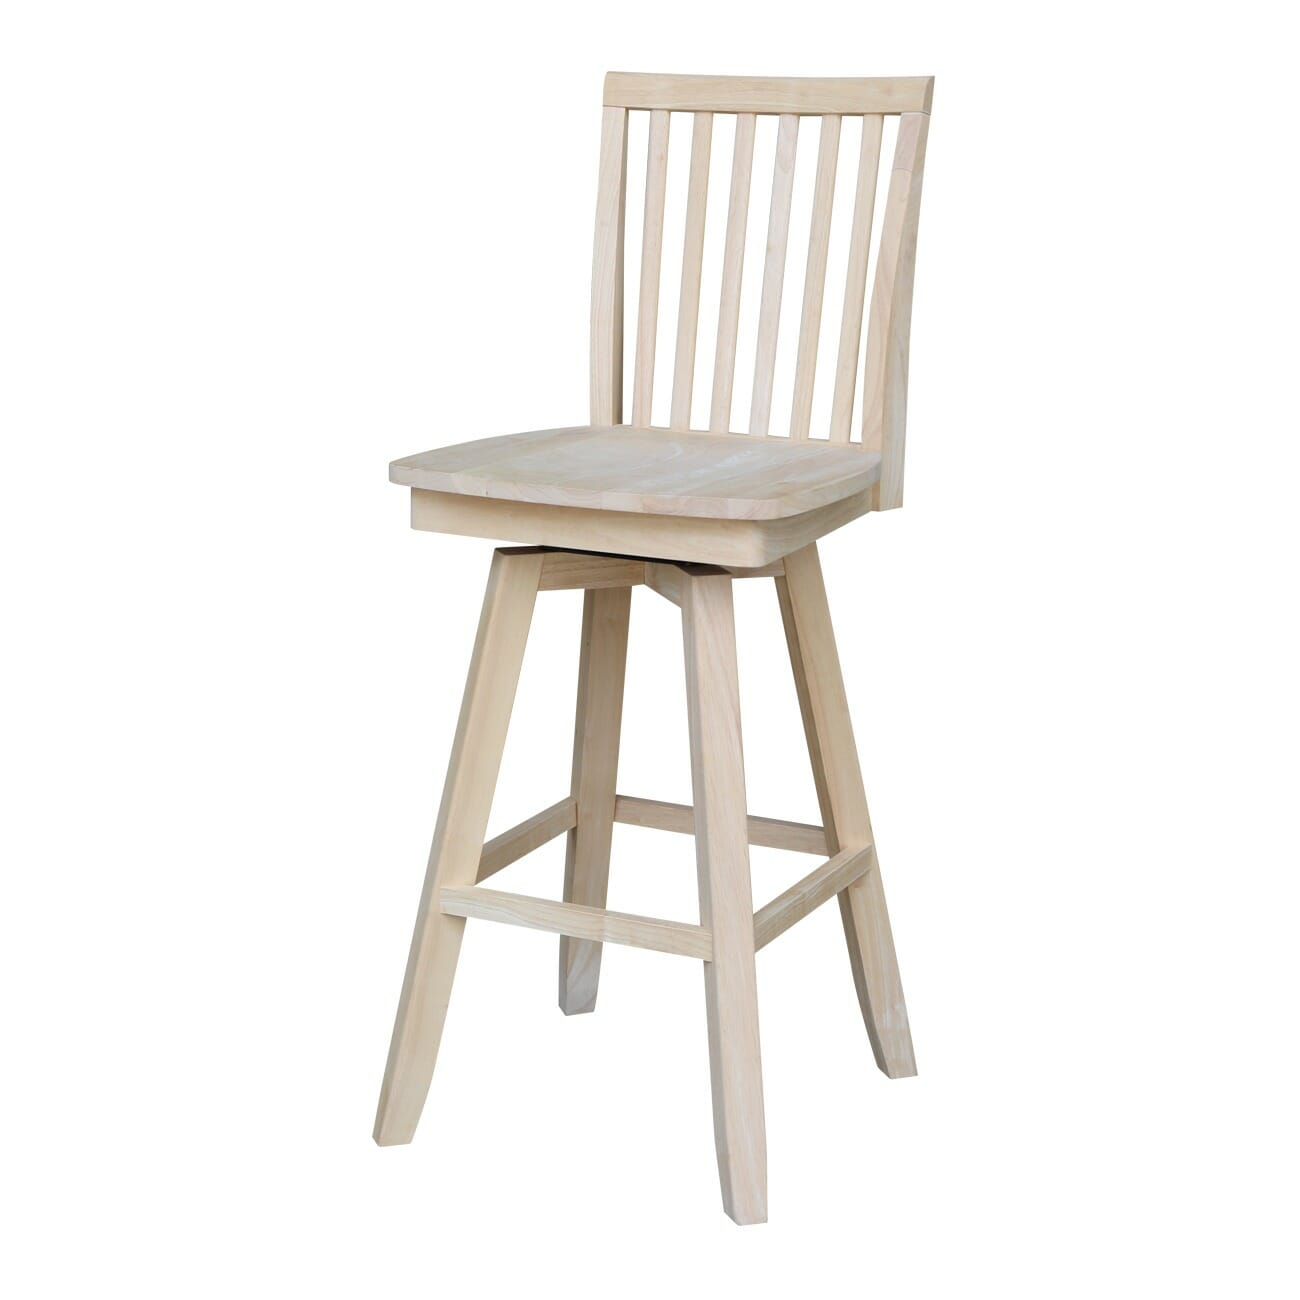 30 Inch Tall Swivel Mission Barstool, Bar Stools 30 Inch Height